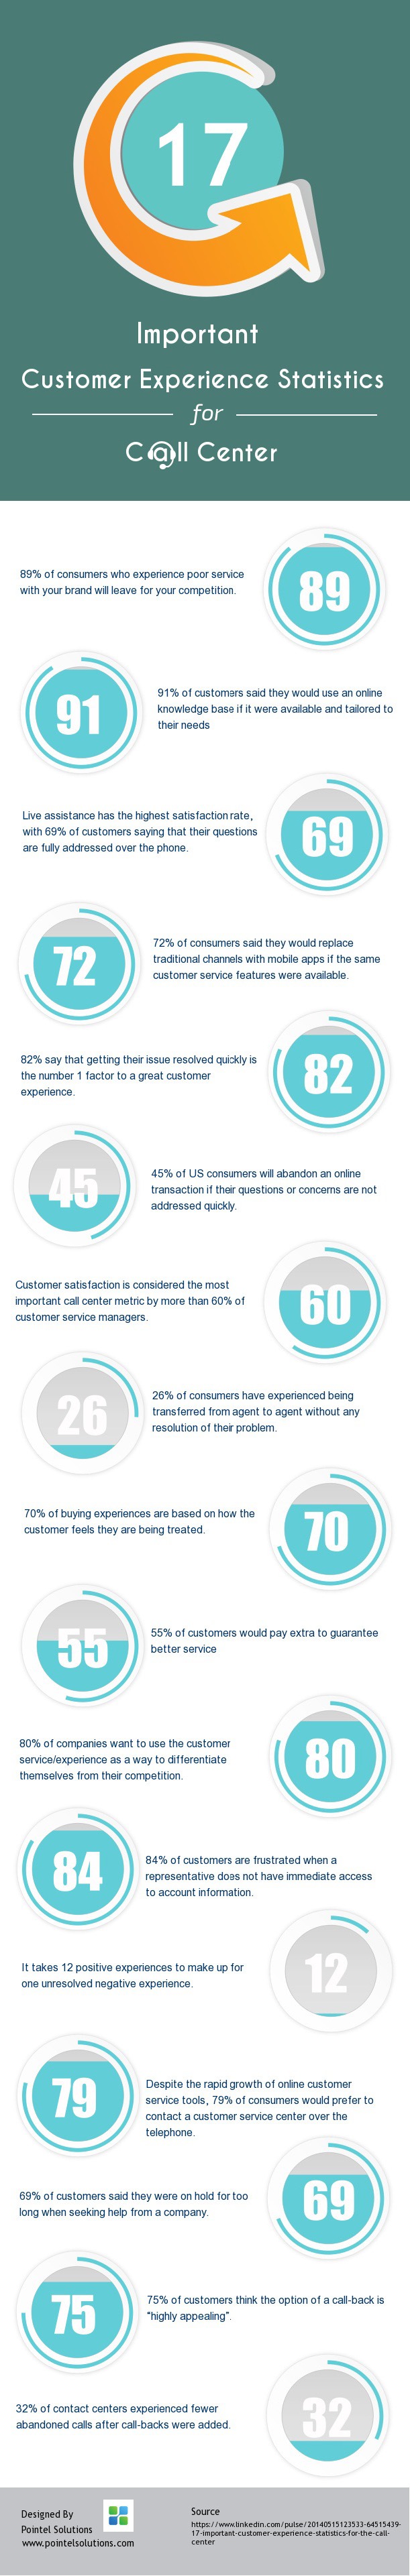 17 Important Customer Experience Statistics for the Call Center Visual.ly